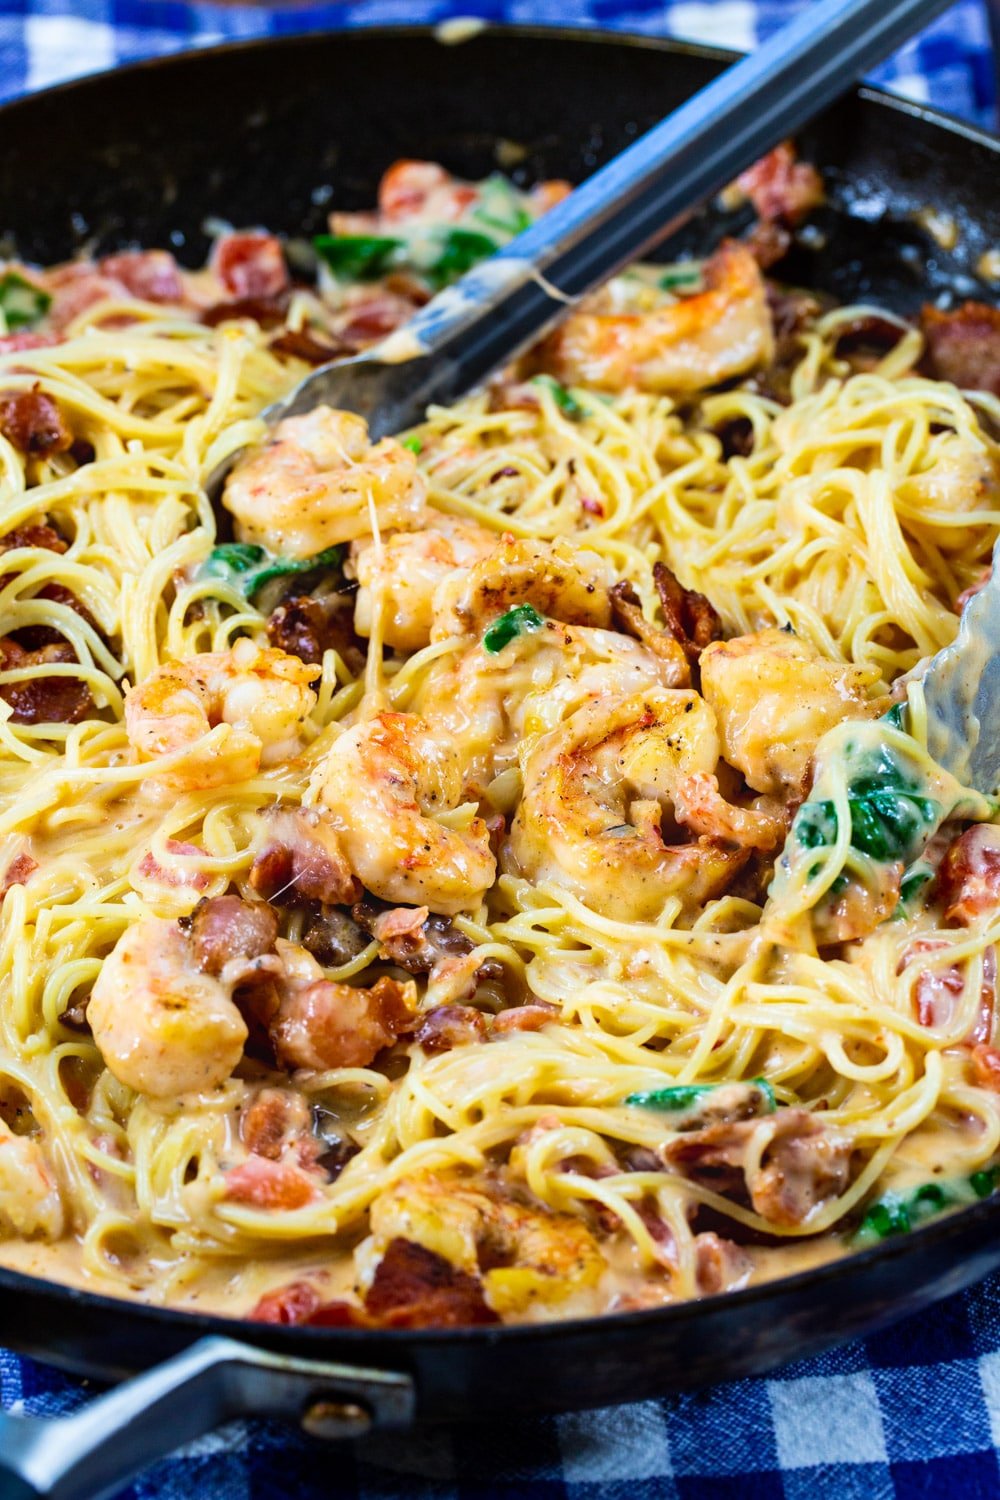 Tongs scooping up Creamy Angel Hair Pasta with Bacon and Shrimp.